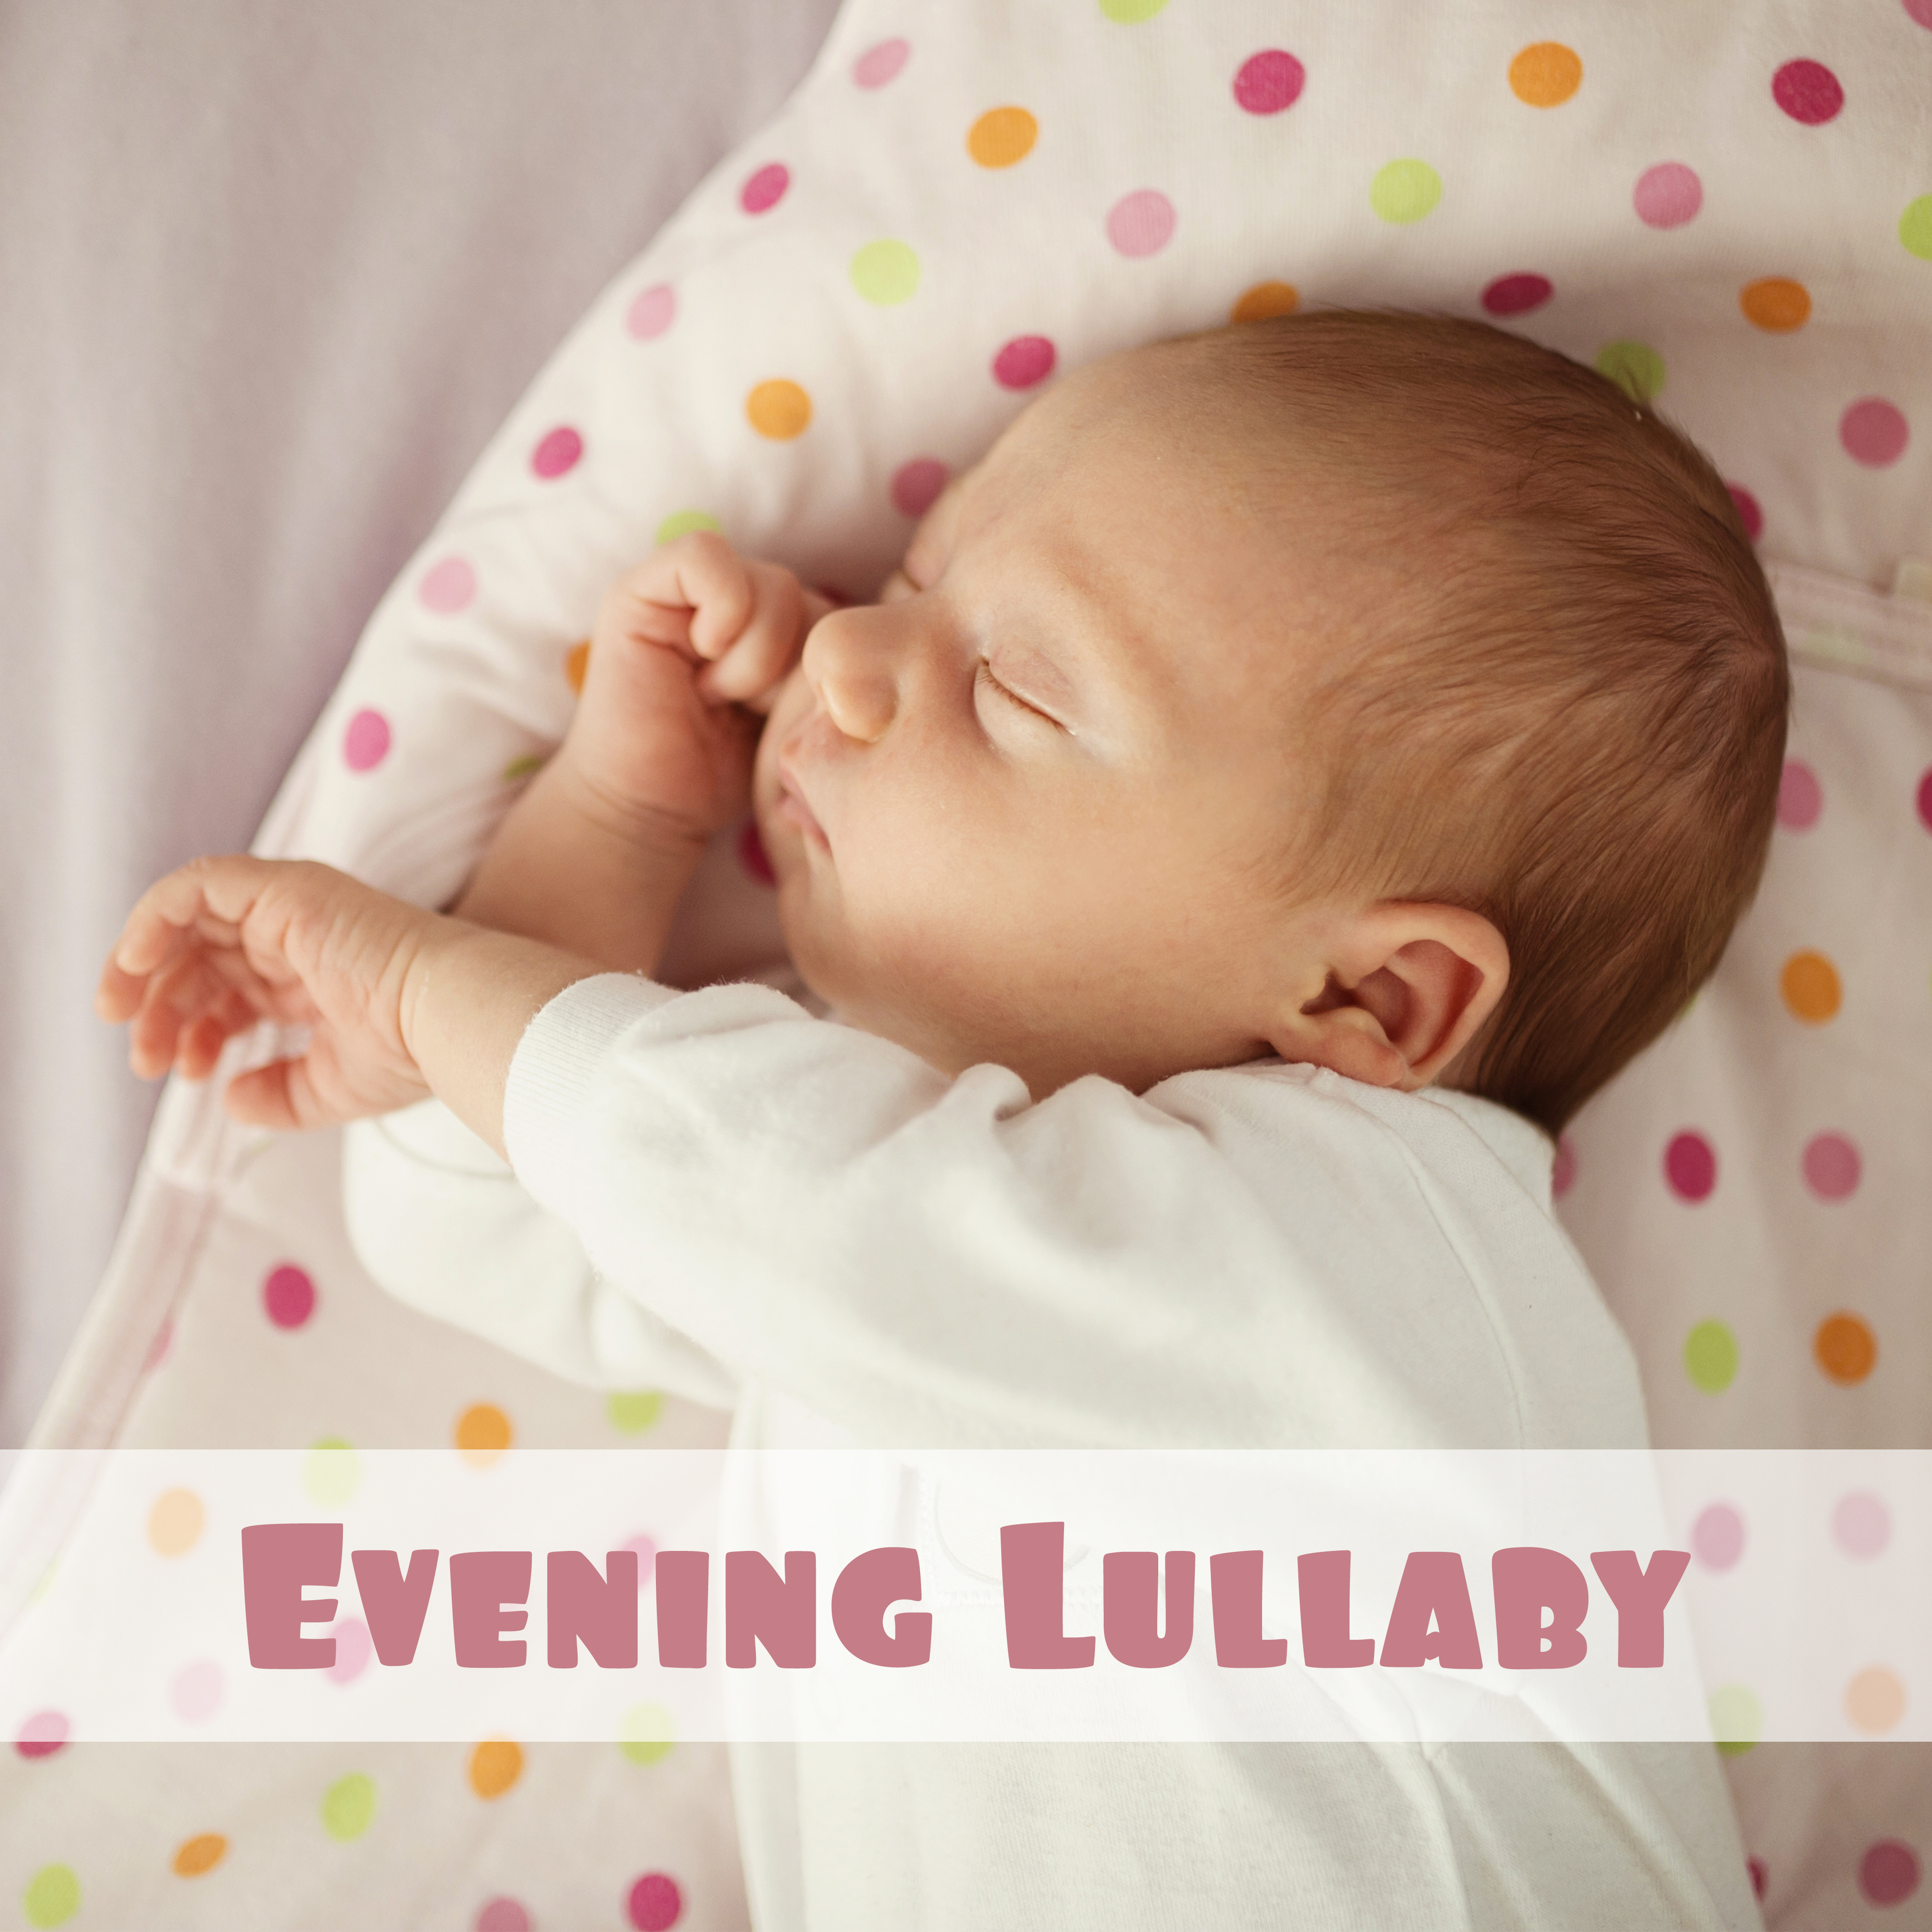 Evening Lullaby – Soft Music for Kids, Soothing Cradle Songs, Restful Sleep, Baby Music